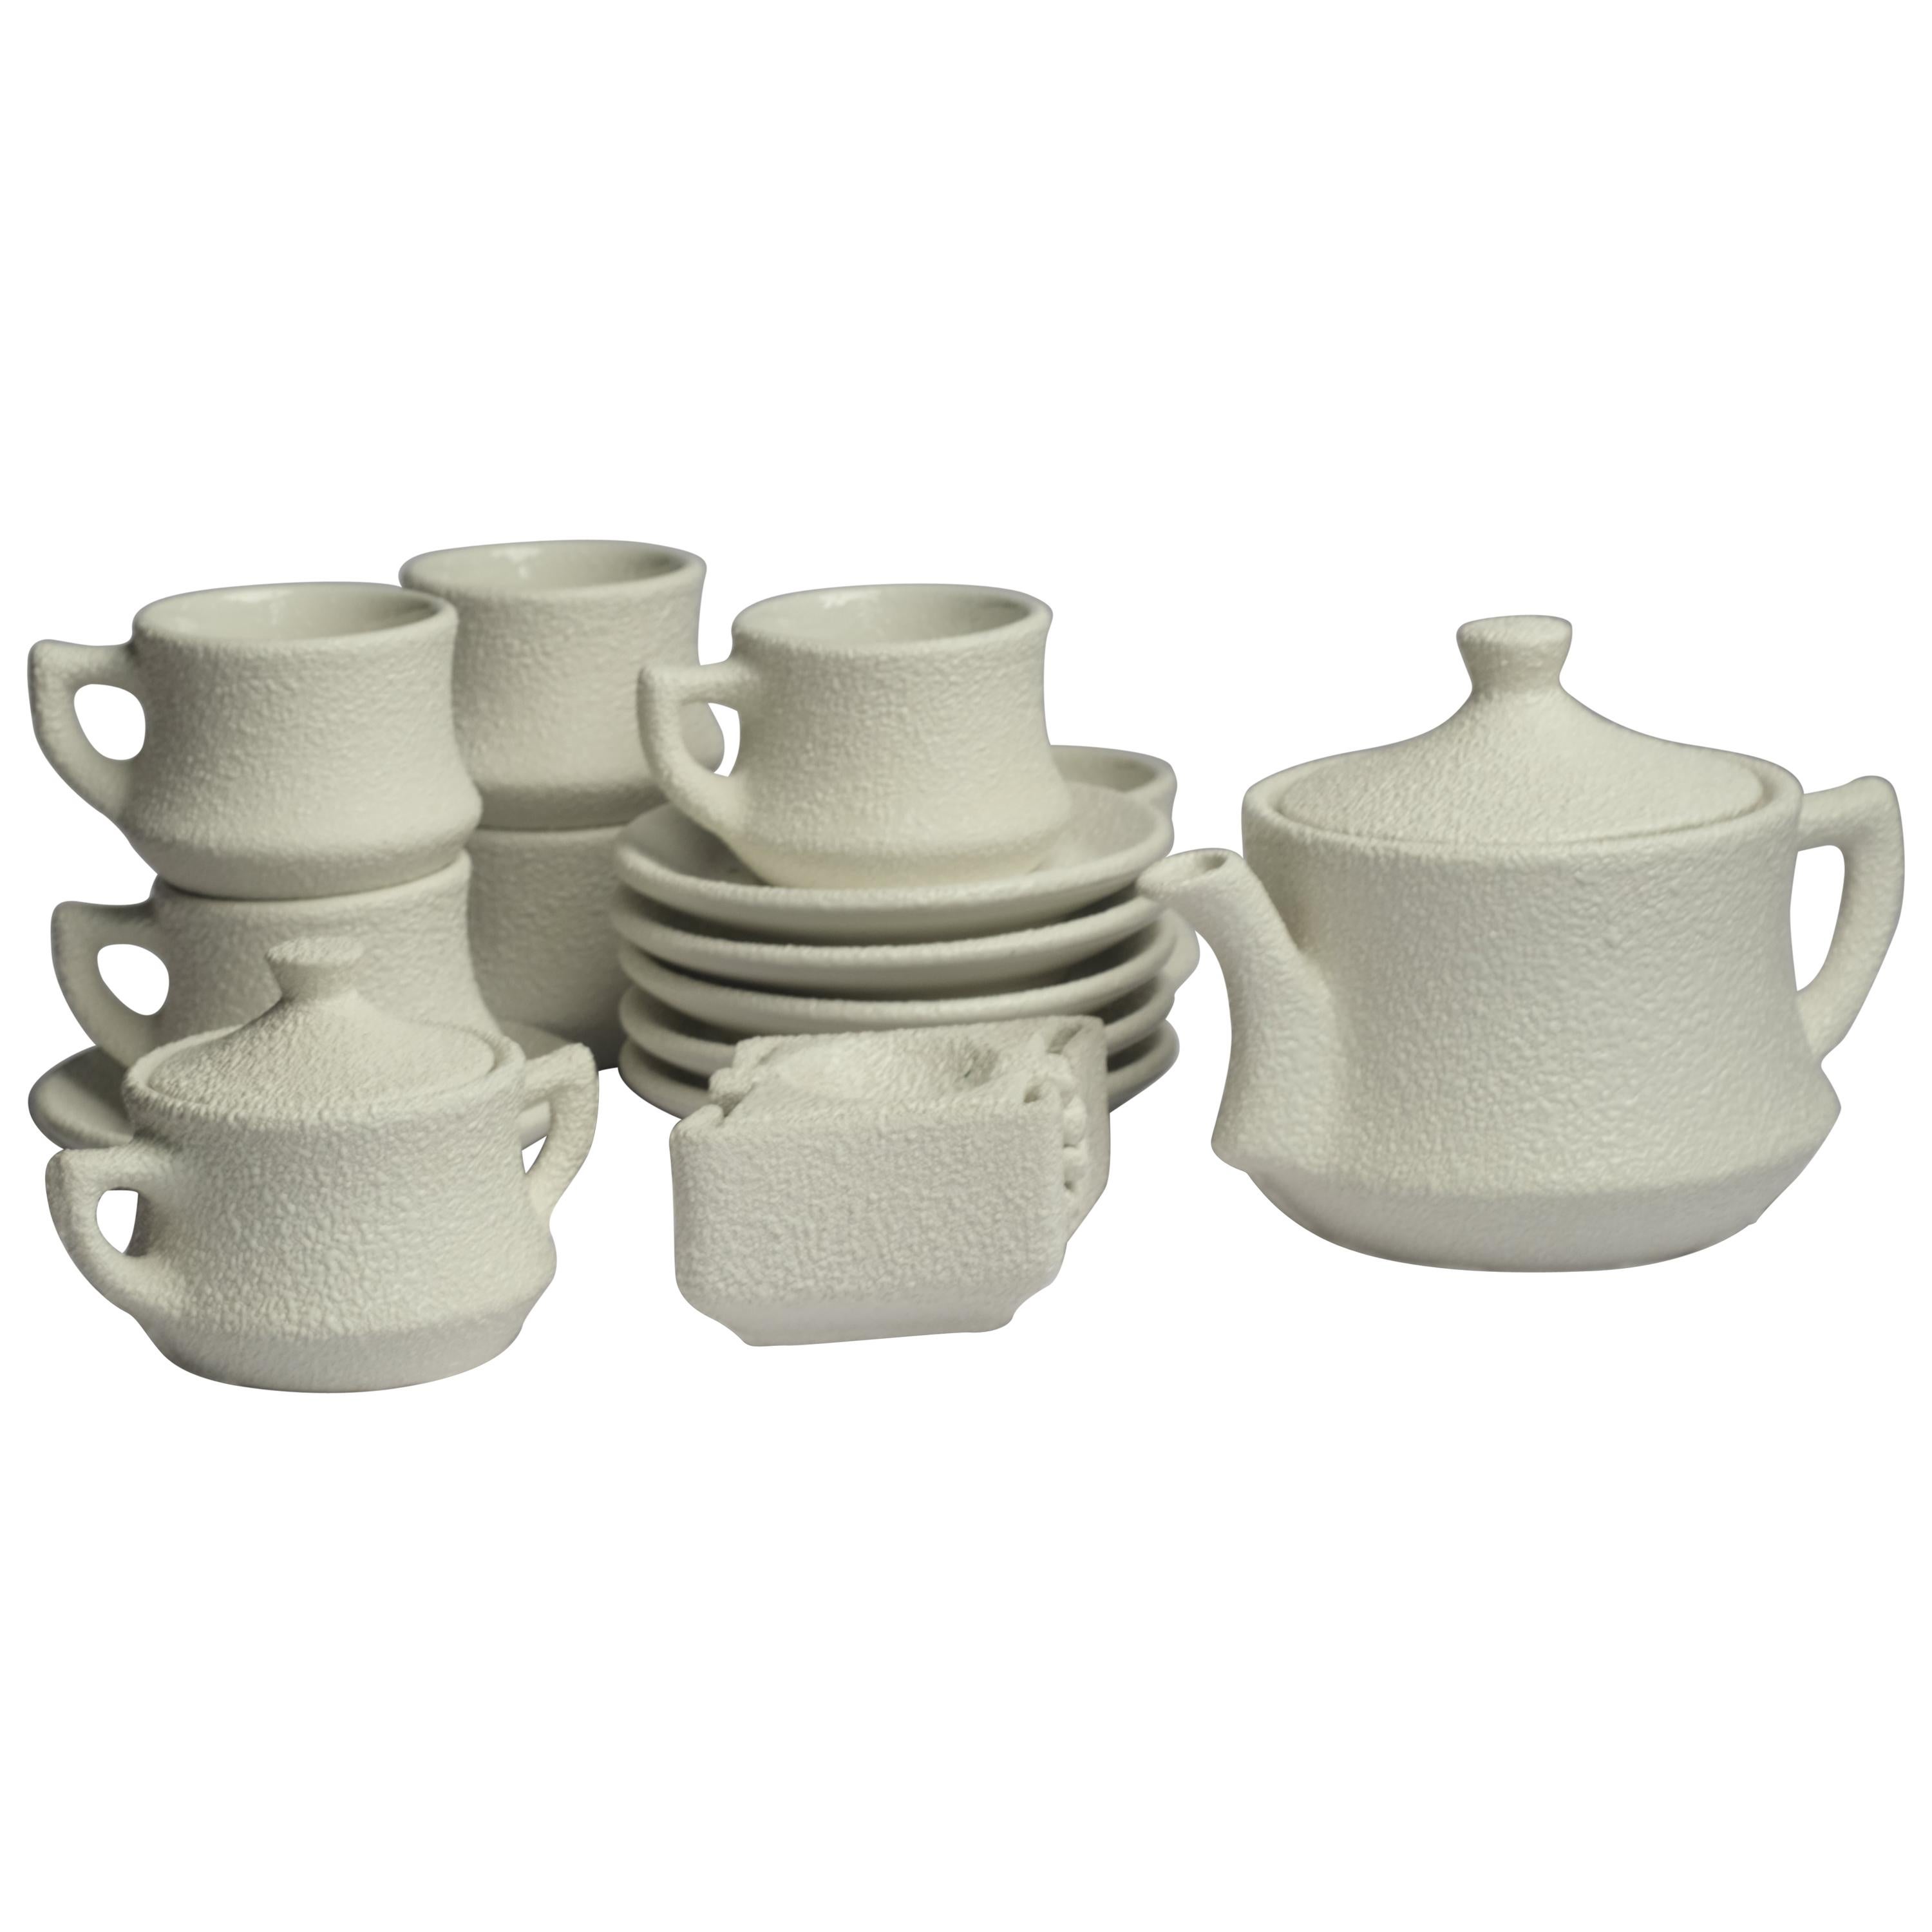 Modern Ceramic Coffee/Tea Set in Sand Textured Stucco Finish For Sale